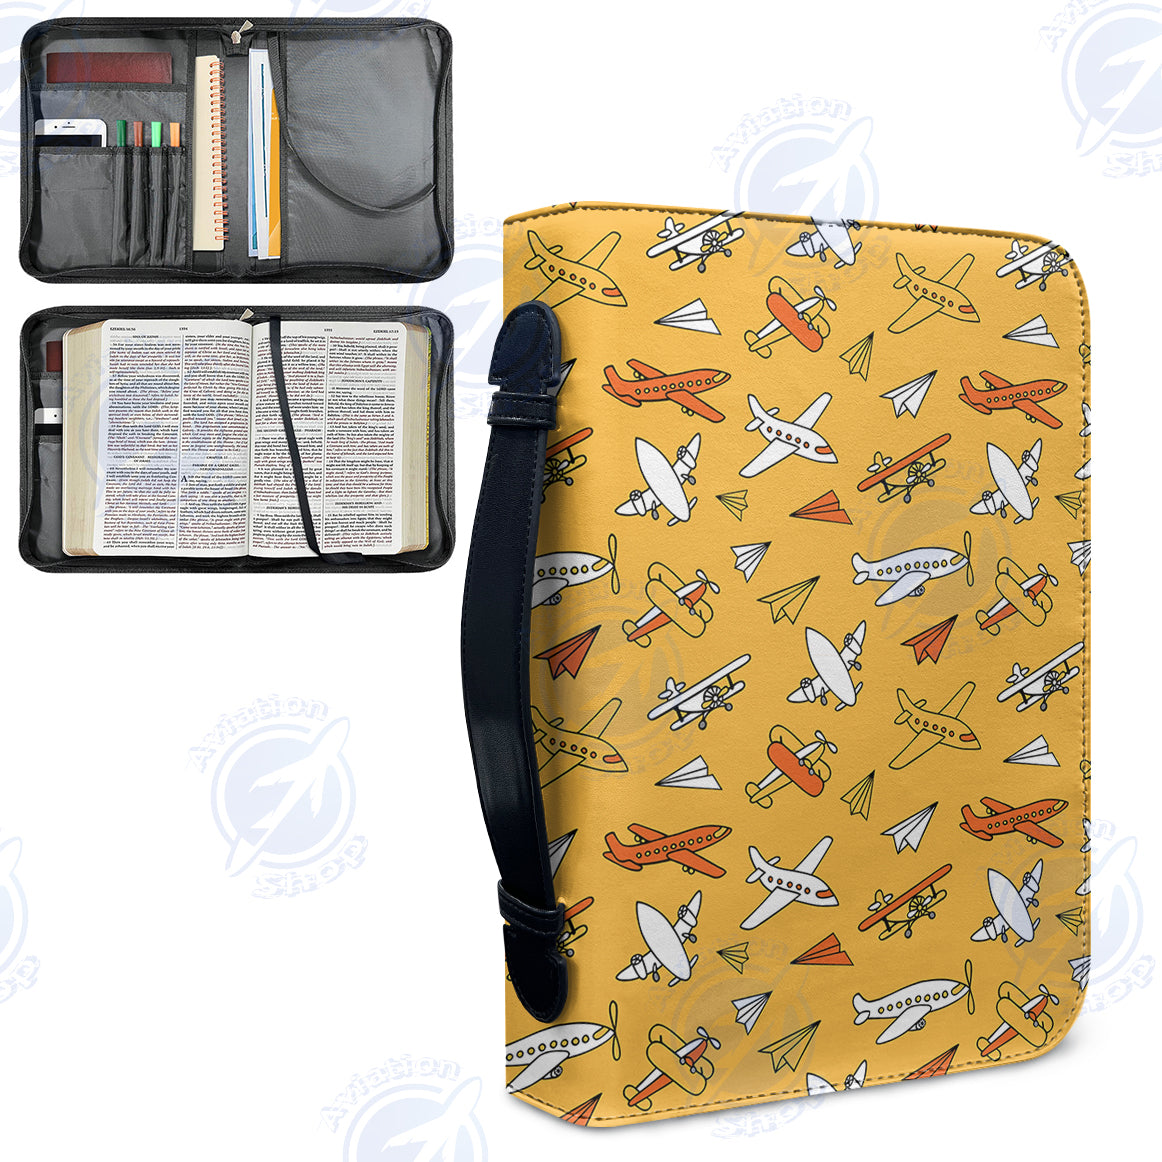 Super Drawings of Airplanes Designed PU Accessories Bags